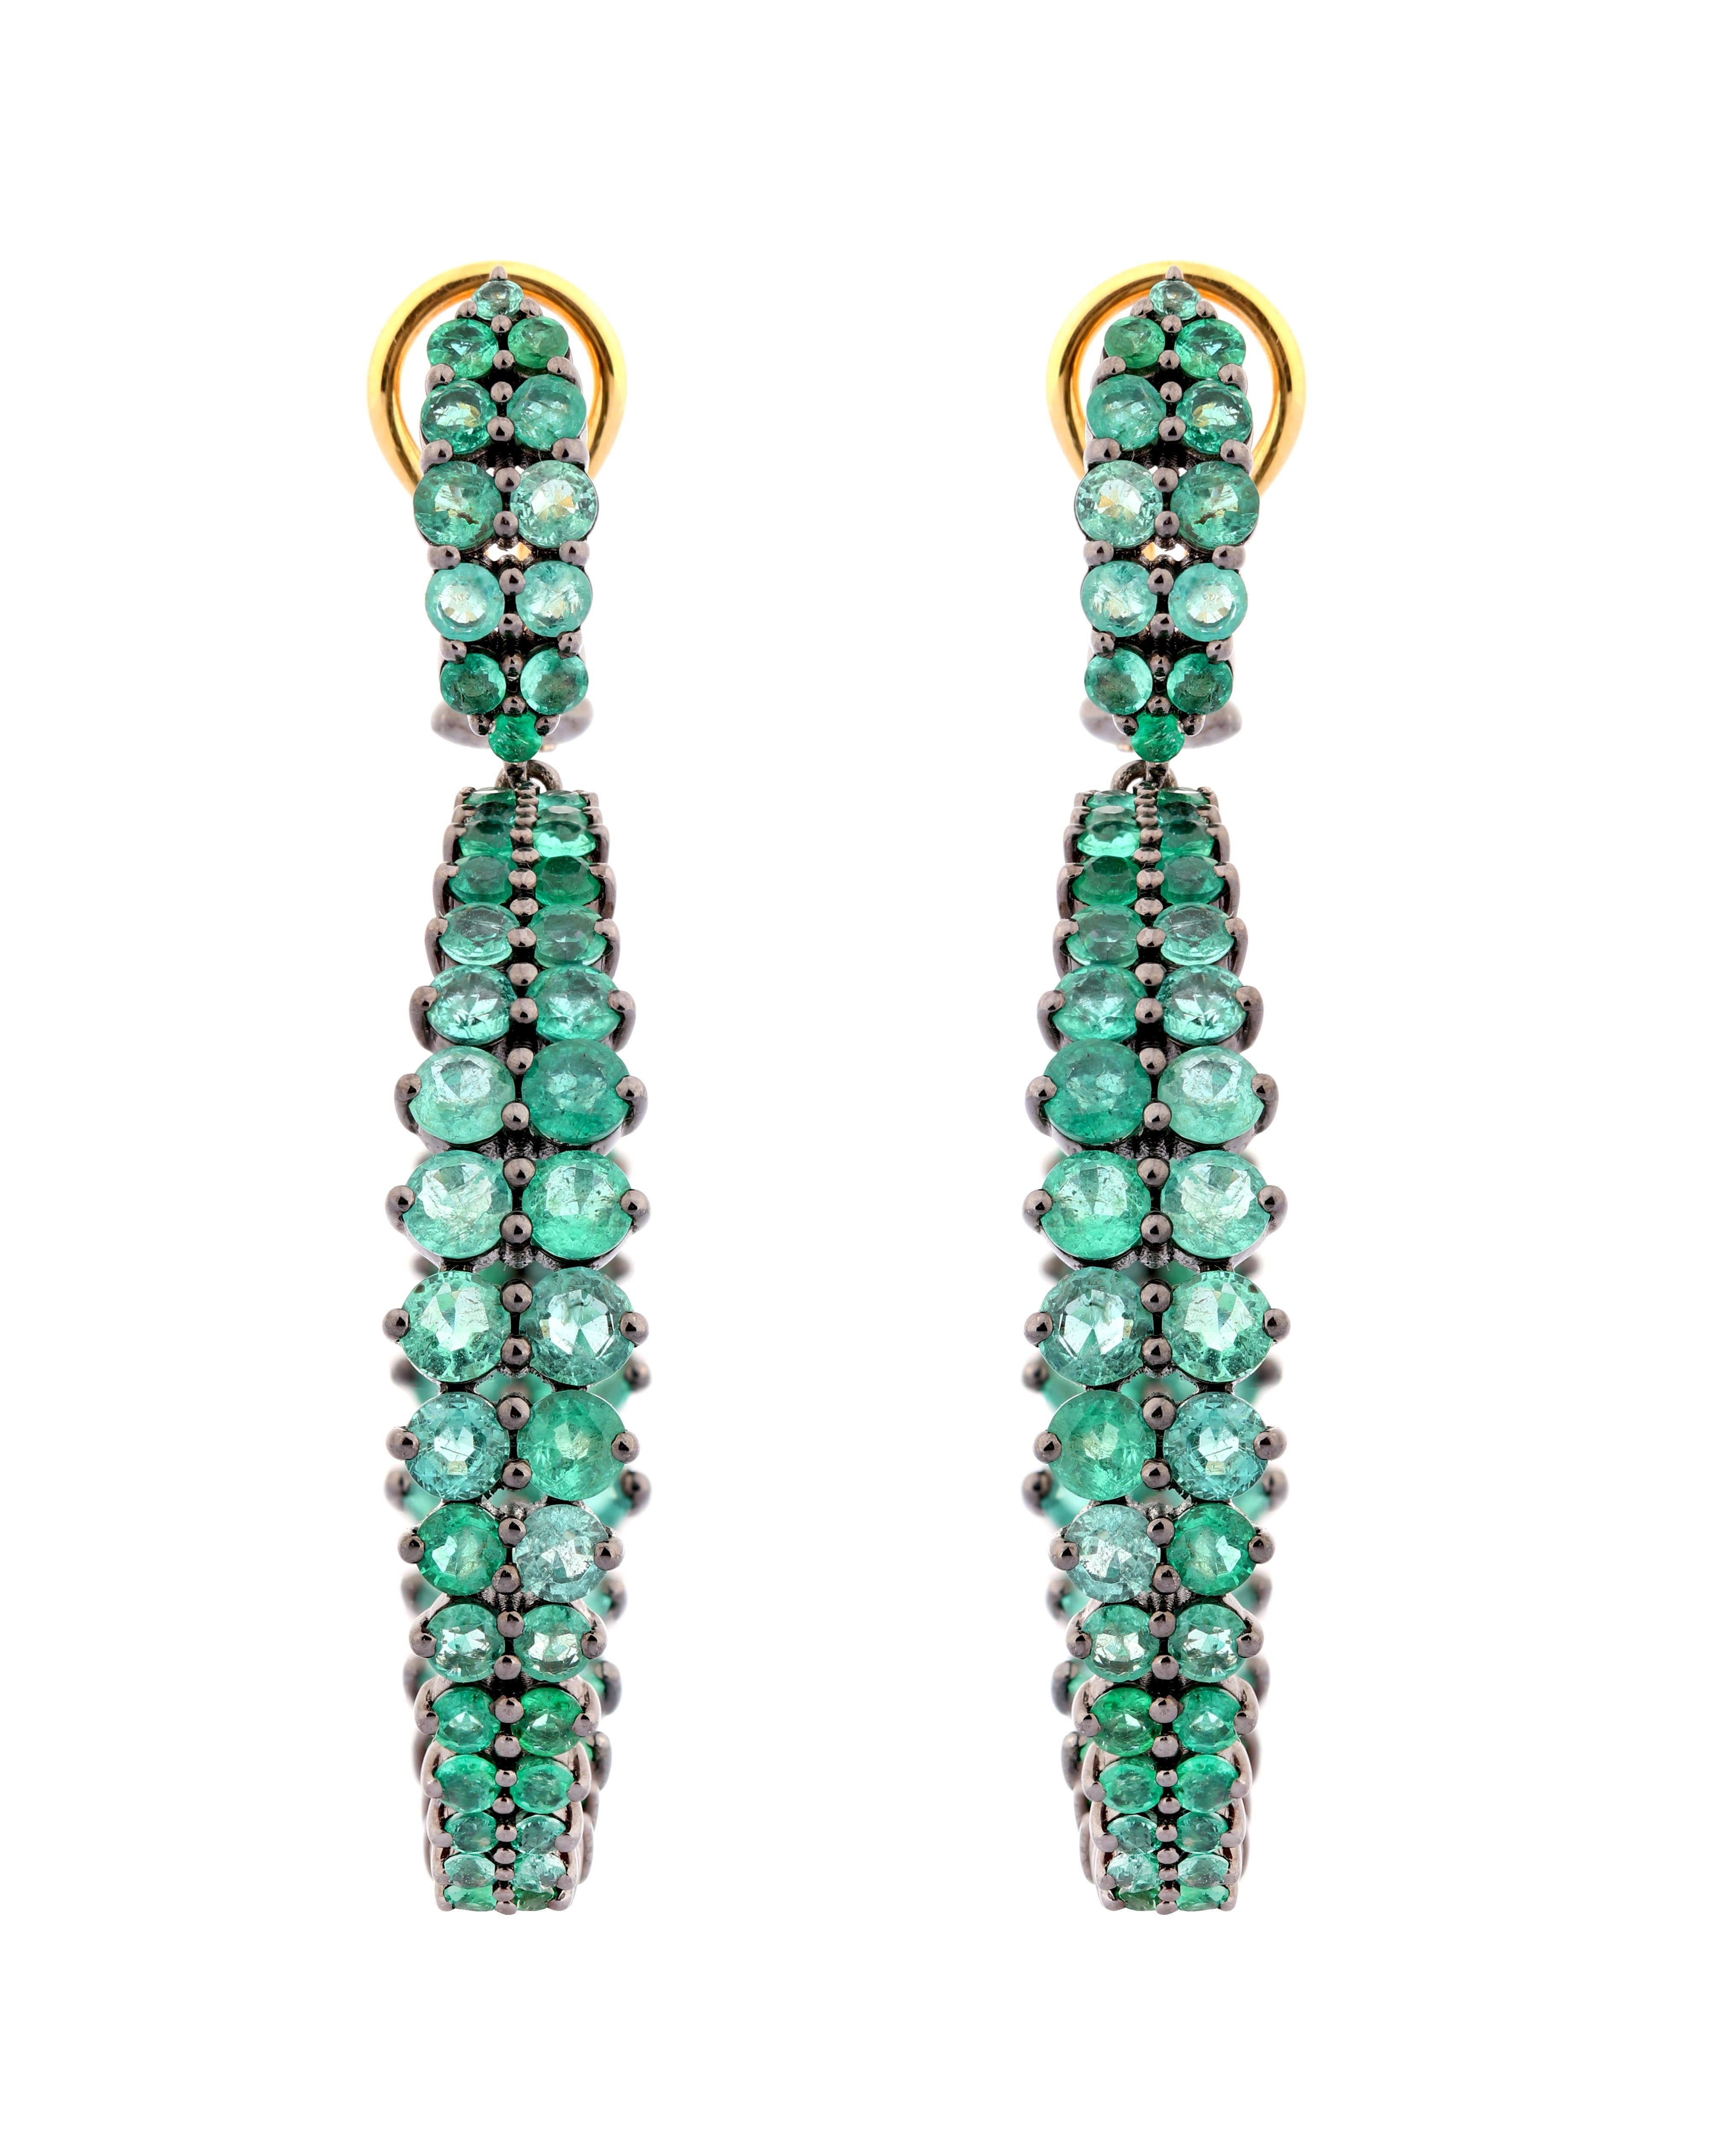 12.74 Carat Emerald Hoop Earrings in Contemporary Style

We believe in power dressing and adore the women who style their jewels with anything and everything they wear. For the ones who like to keep it classy and experiment their way out with